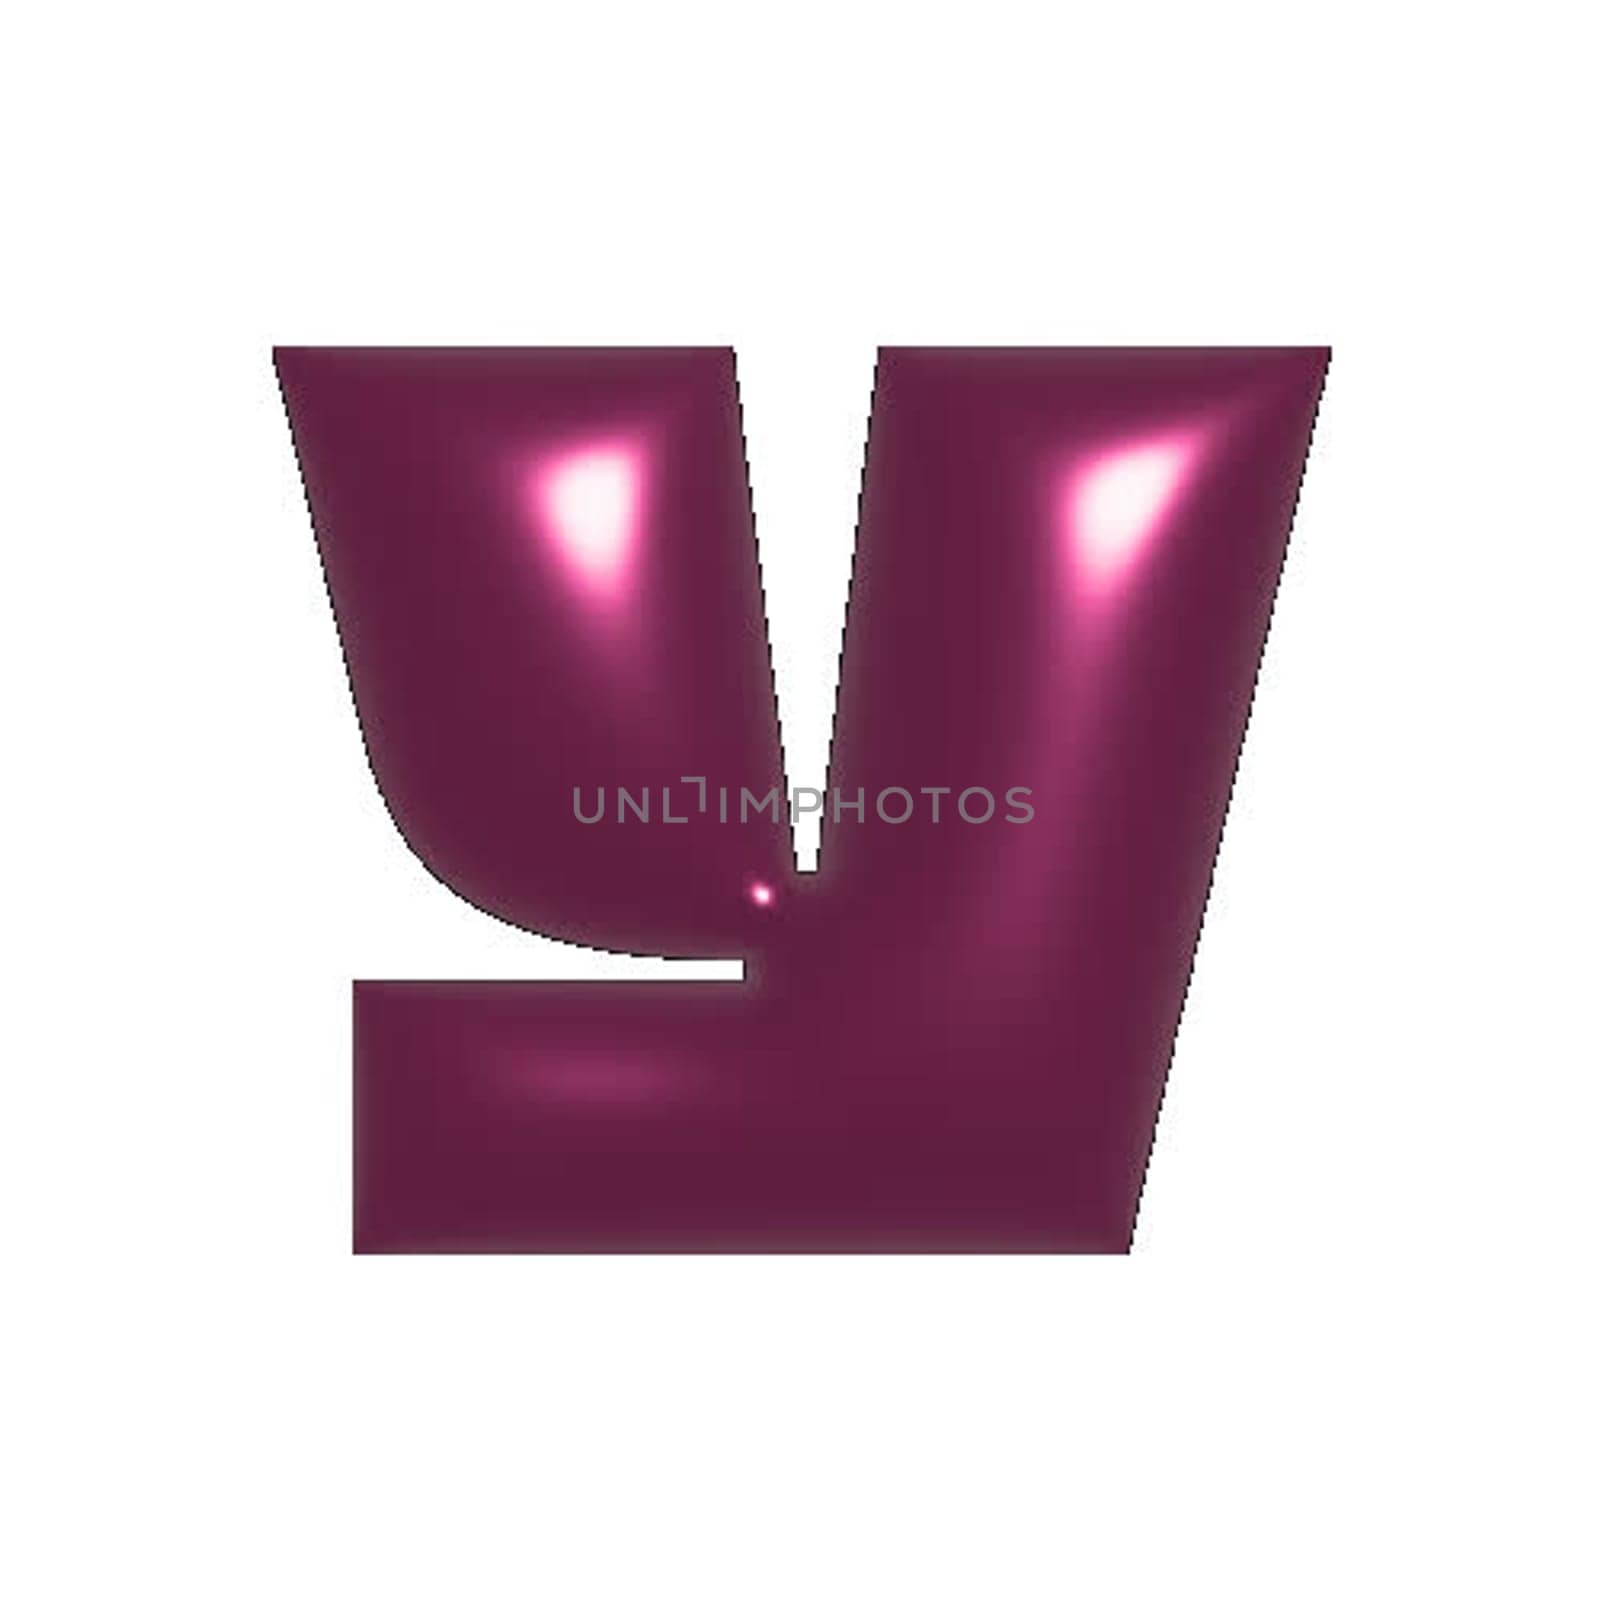 Red metal shiny reflective letter Y 3D illustration by Dustick